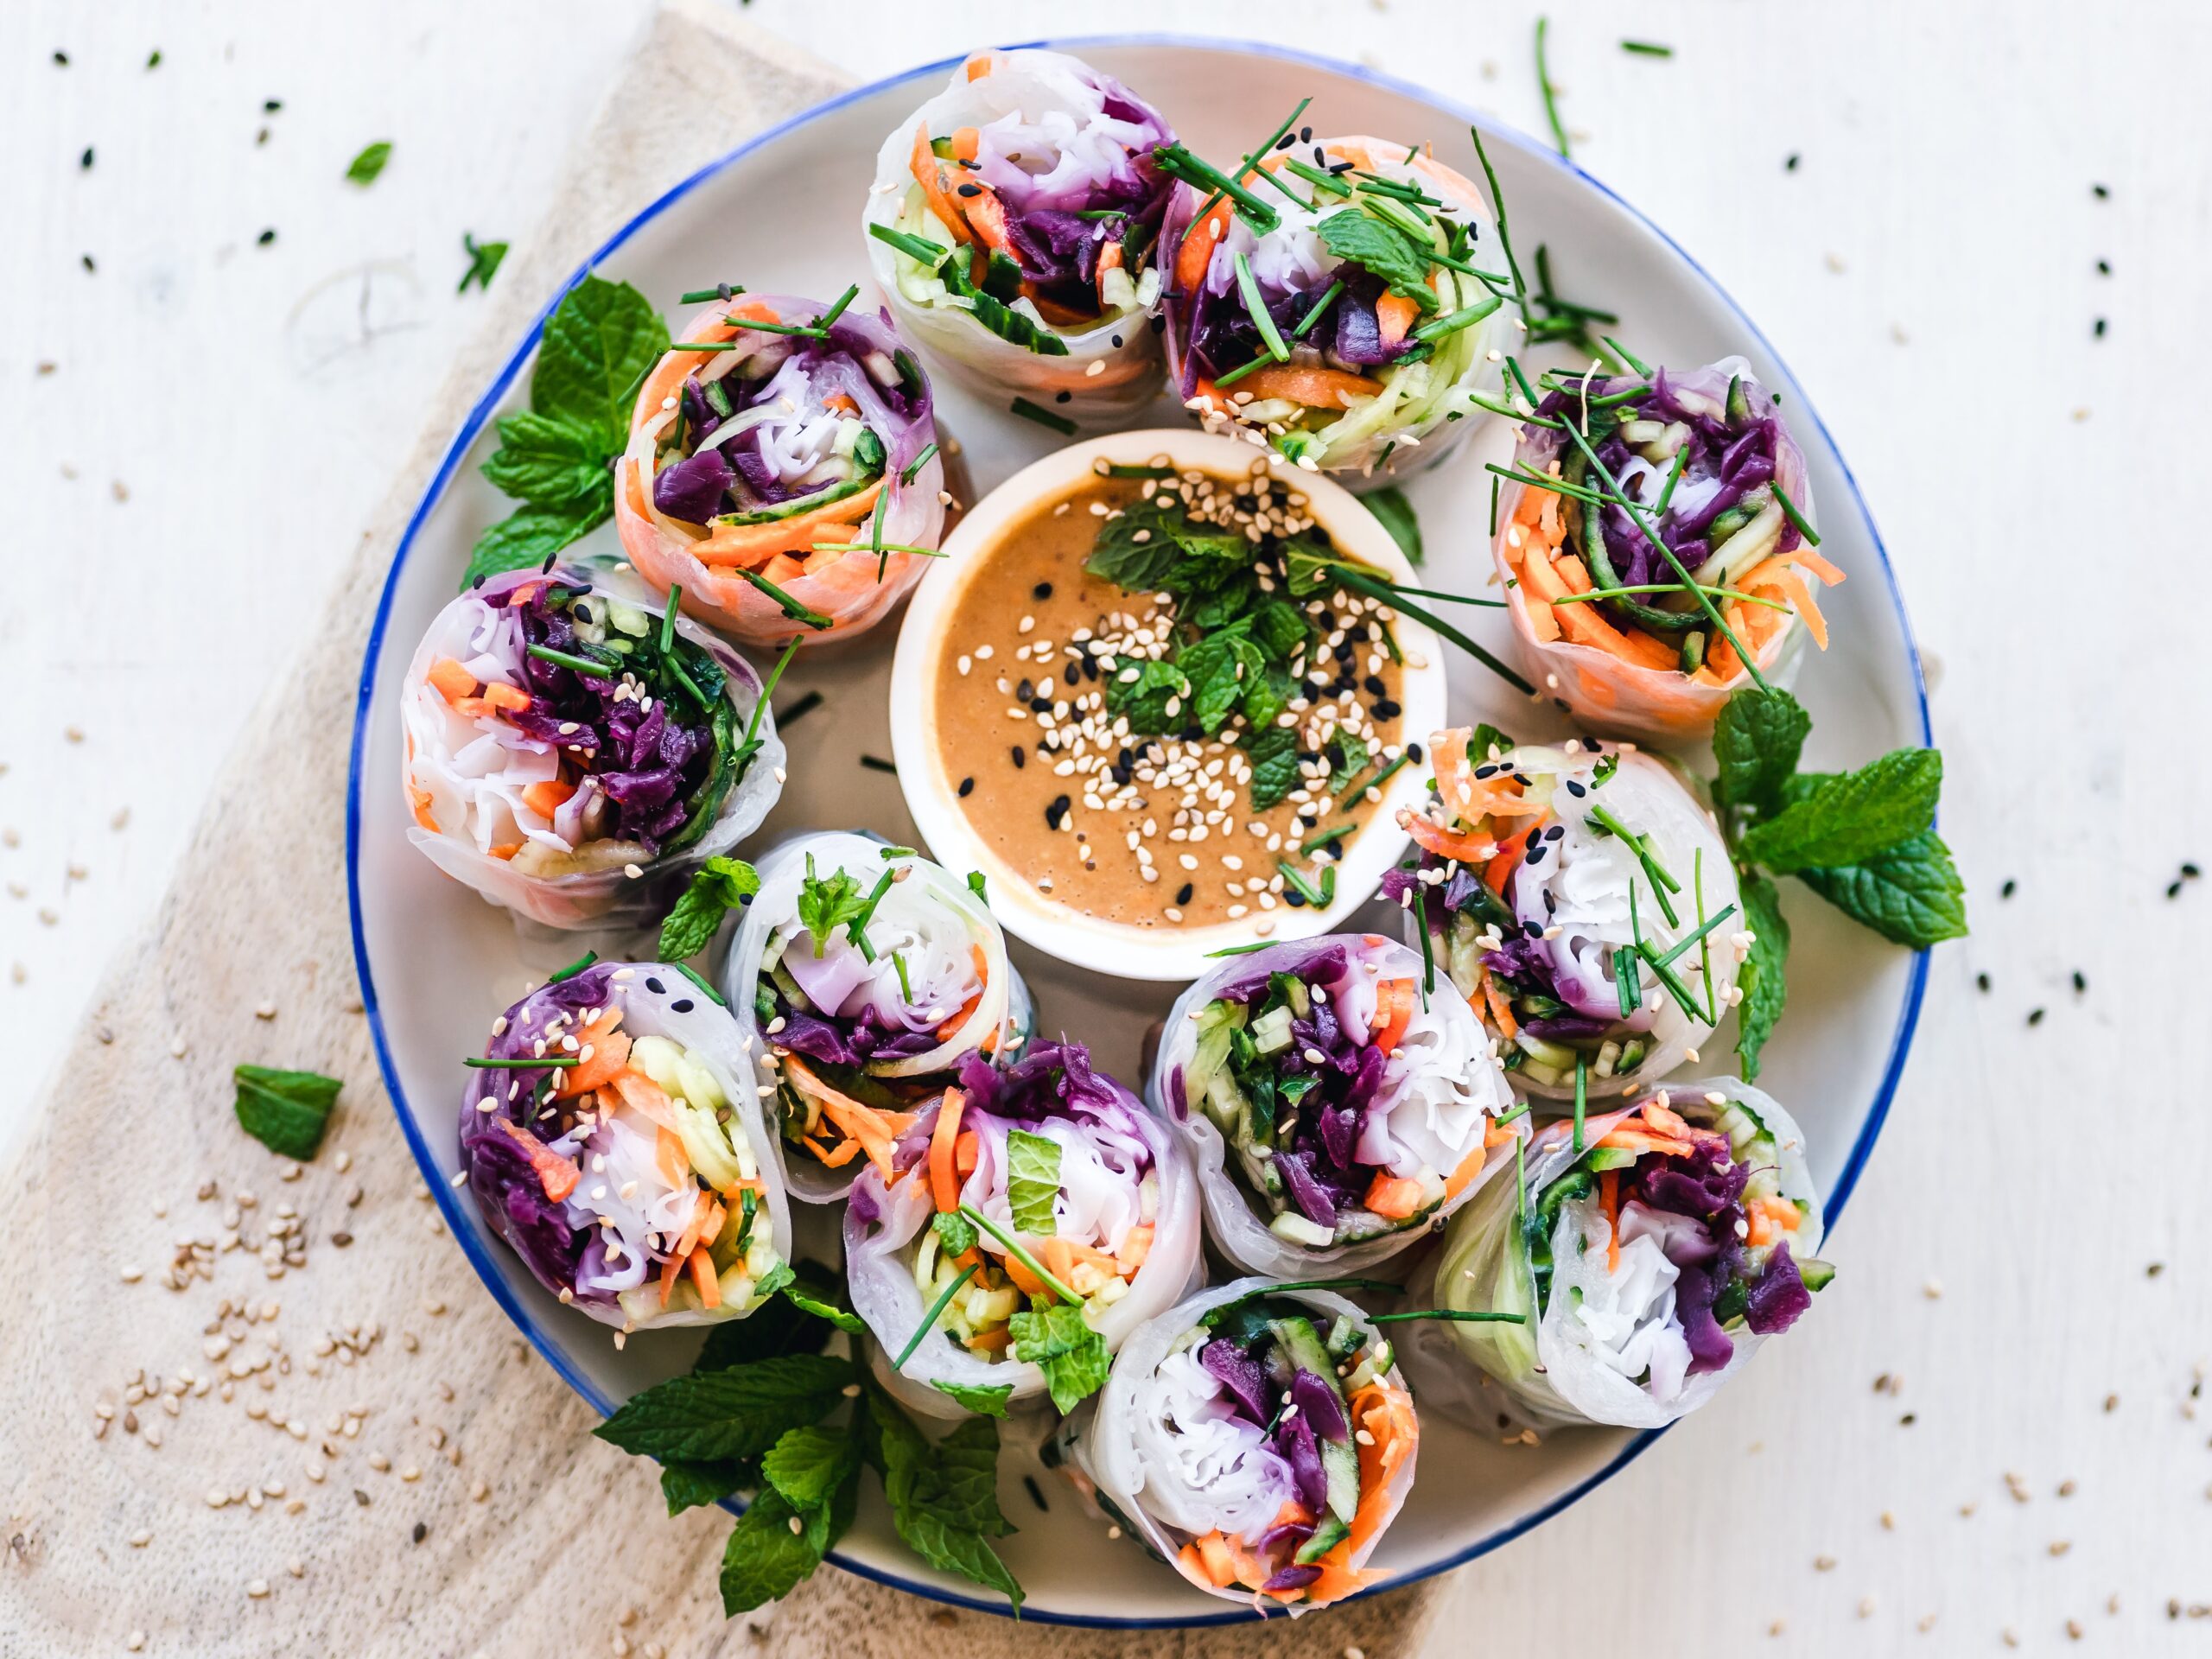 Rice paper rolls with a dipping sauce with red cabbage, carrot, mint, daikon radish